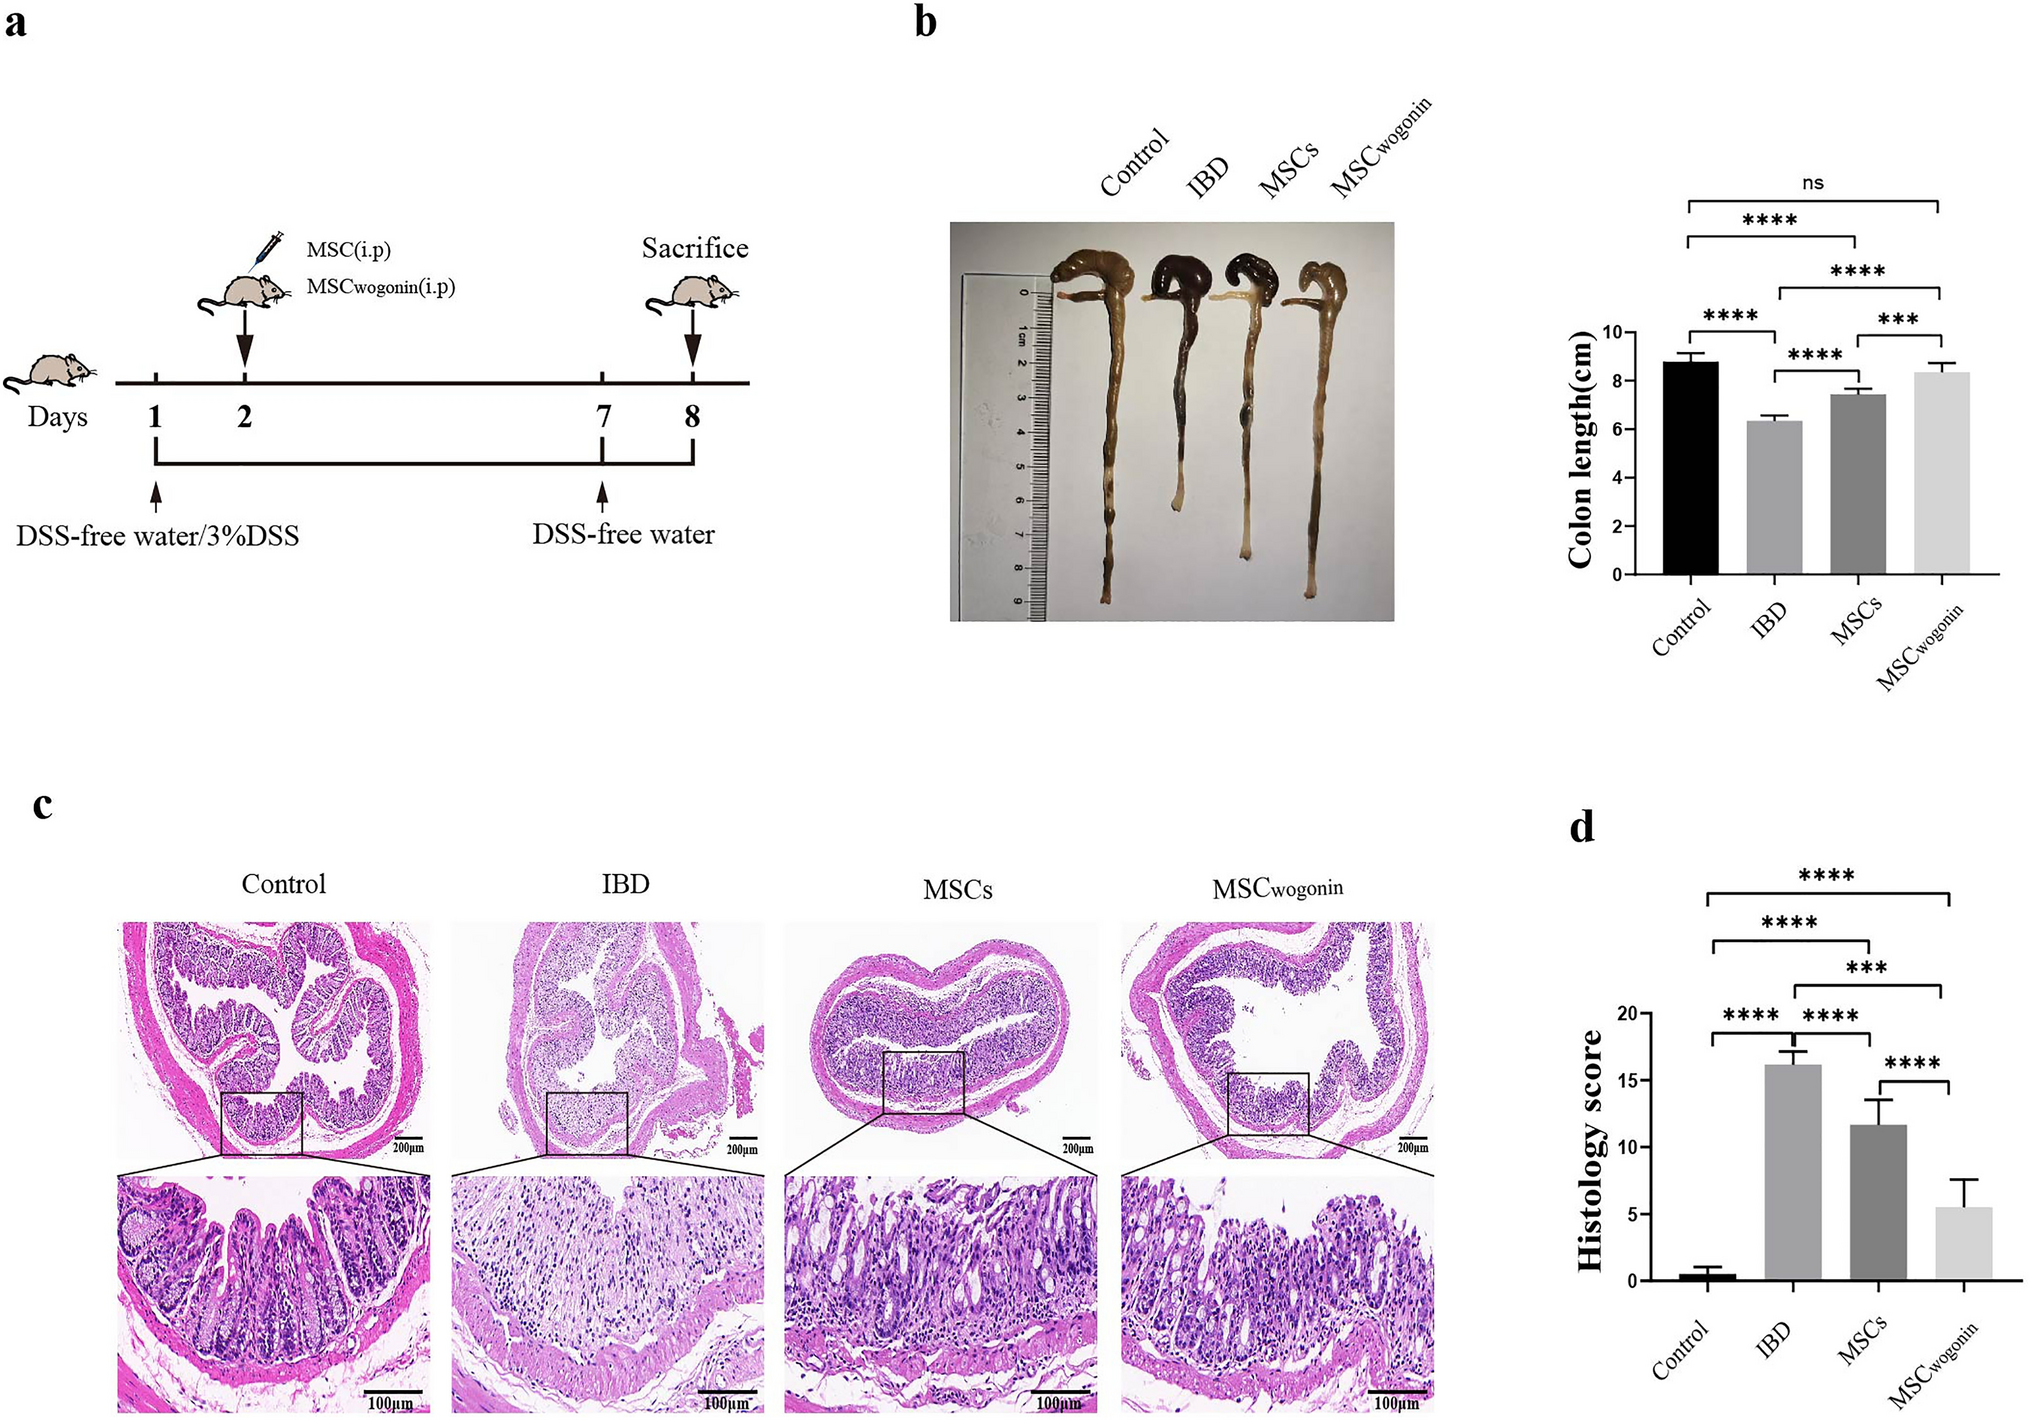 Wogonin preconditioning of MSCs improved their therapeutic efficiency for colitis through promoting glycolysis